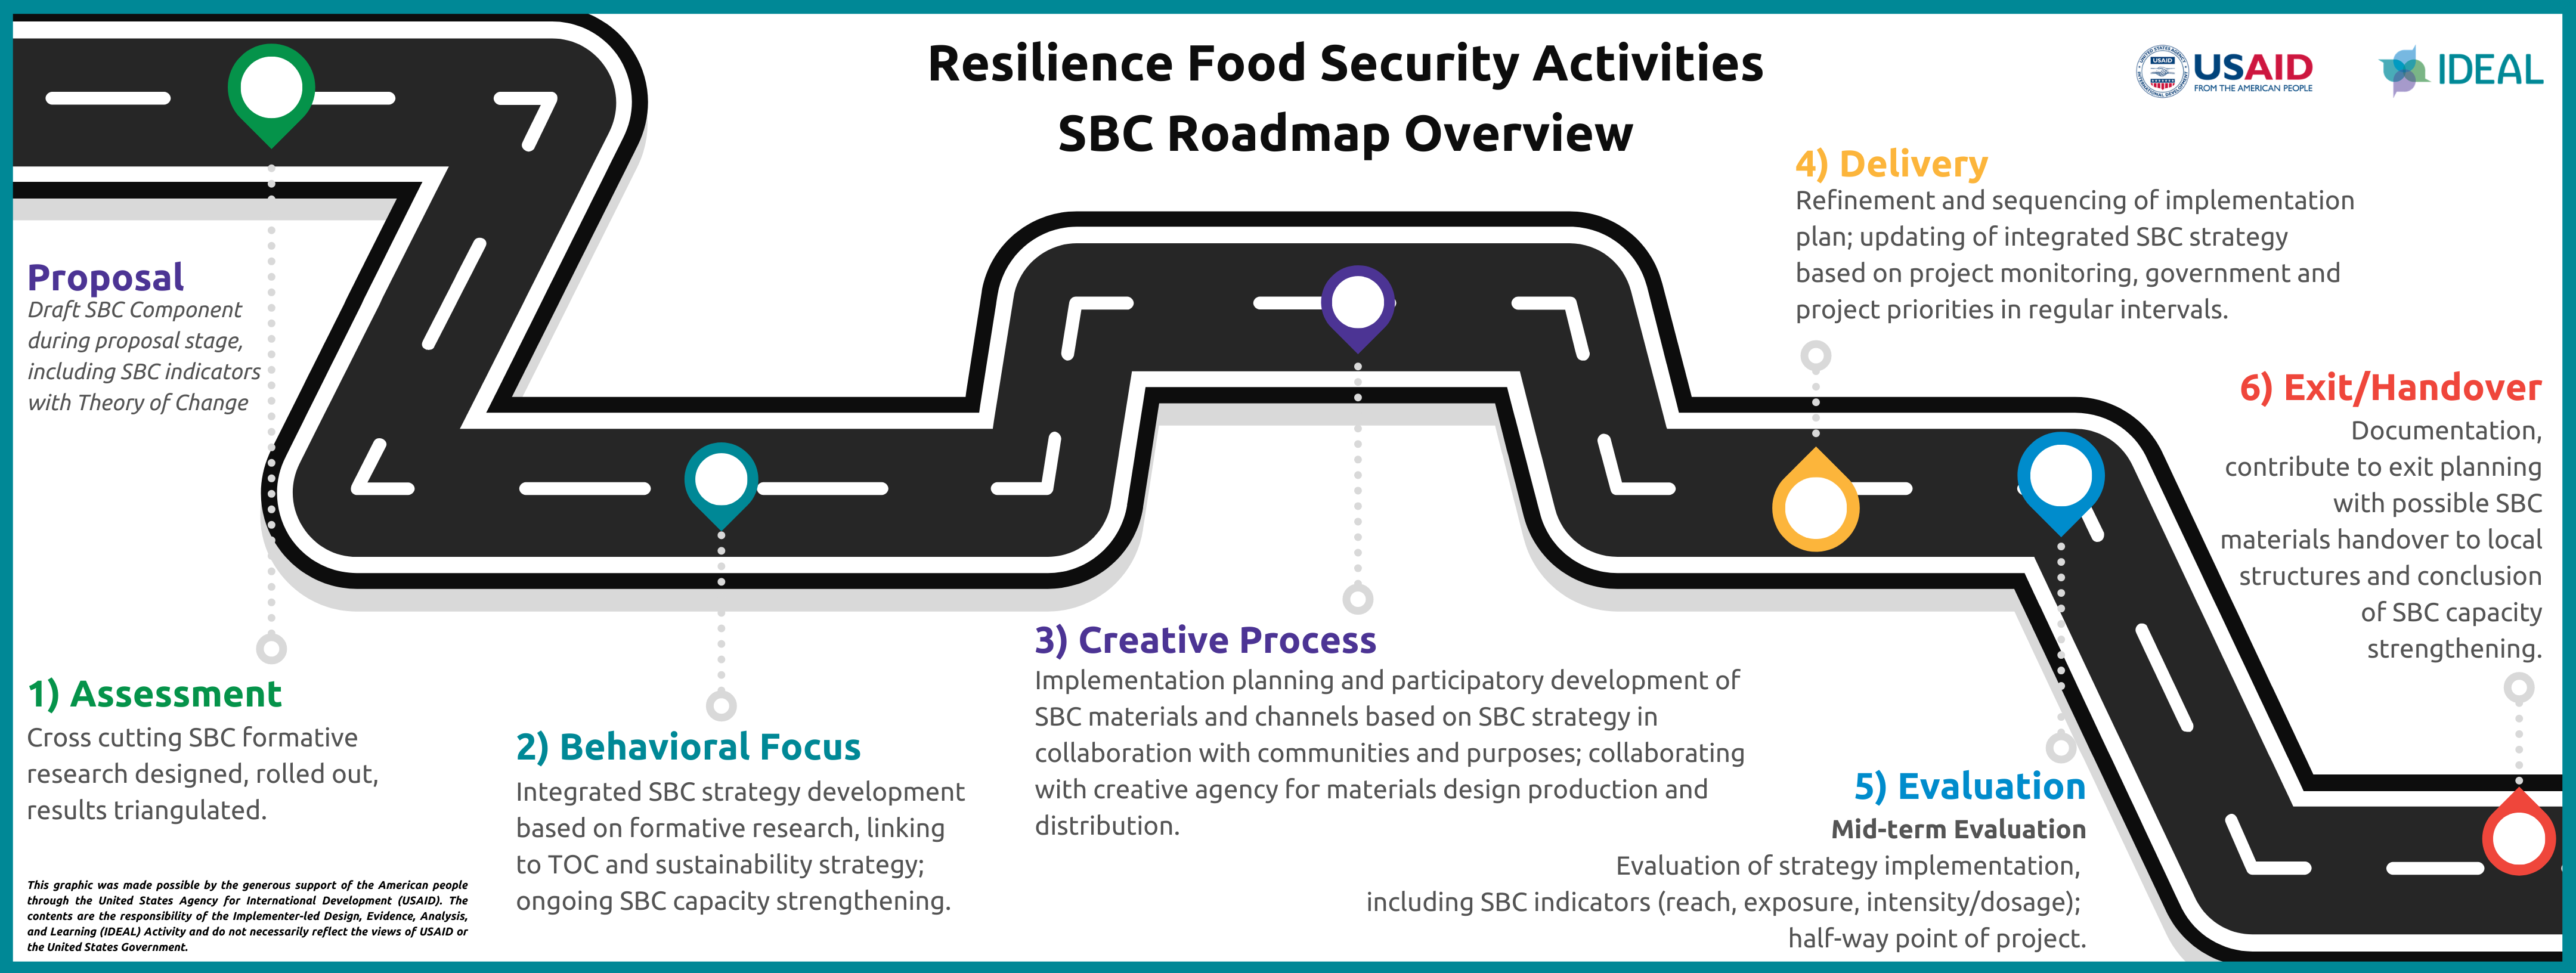 The SBC Roadmap Concept overview. The overview features 7 steps: Proposal, Assessment, Behavioral Focus, Creative Process, Delivery, Evaluation, and Final Year.